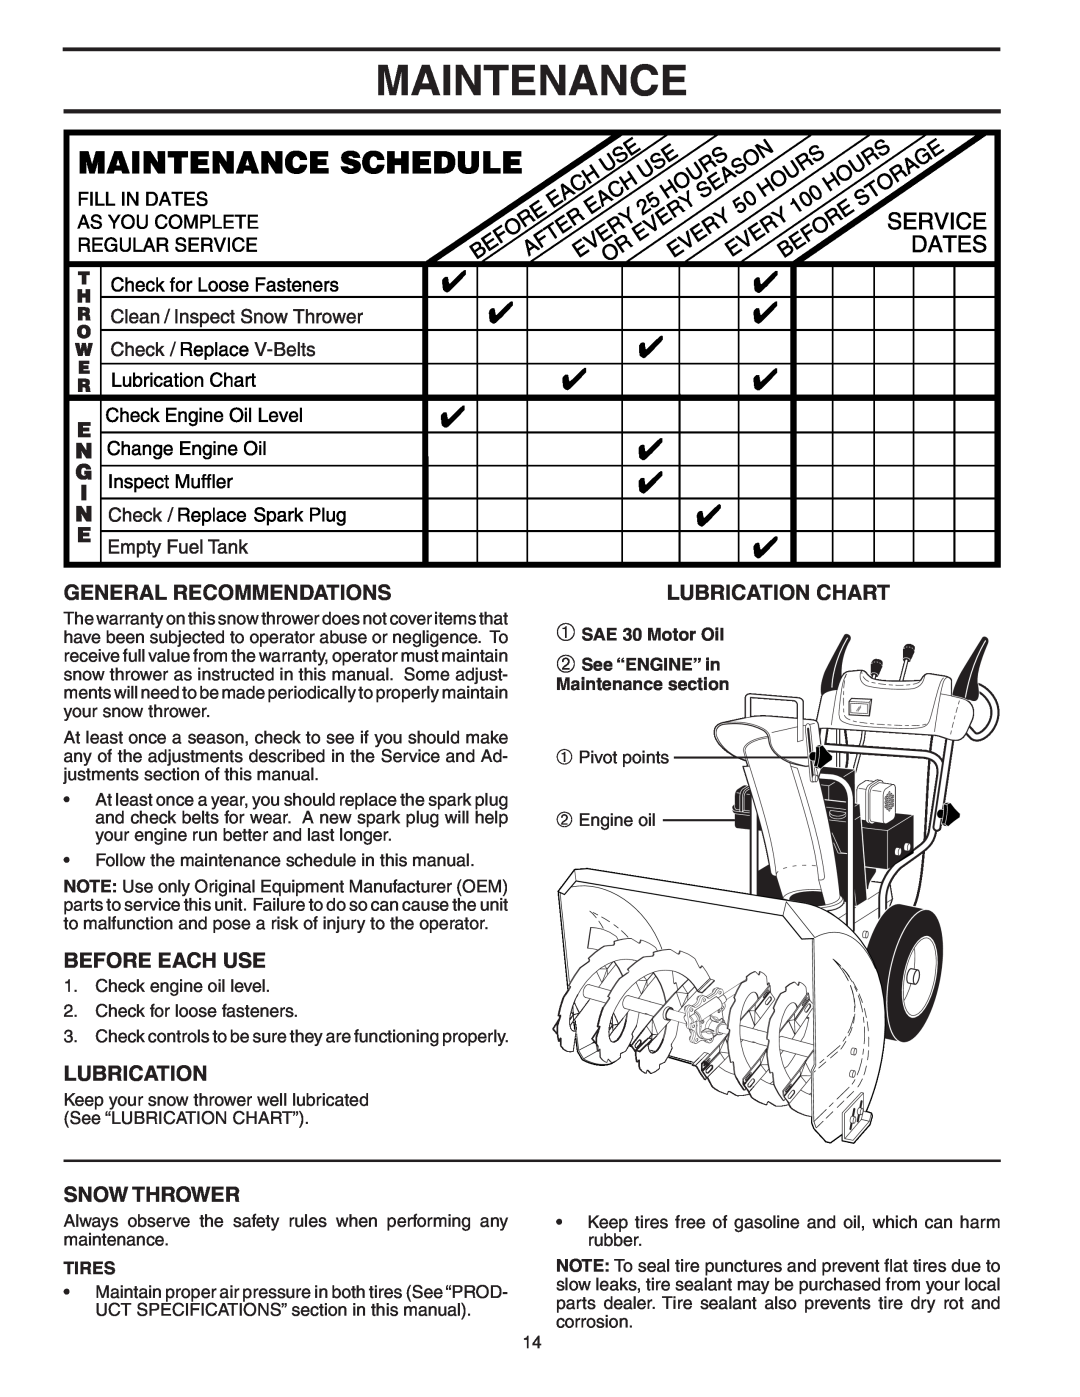 Poulan PP5524ESB Maintenance, General Recommendations, Before Each Use, Snow Thrower, Lubrication Chart, Tires 